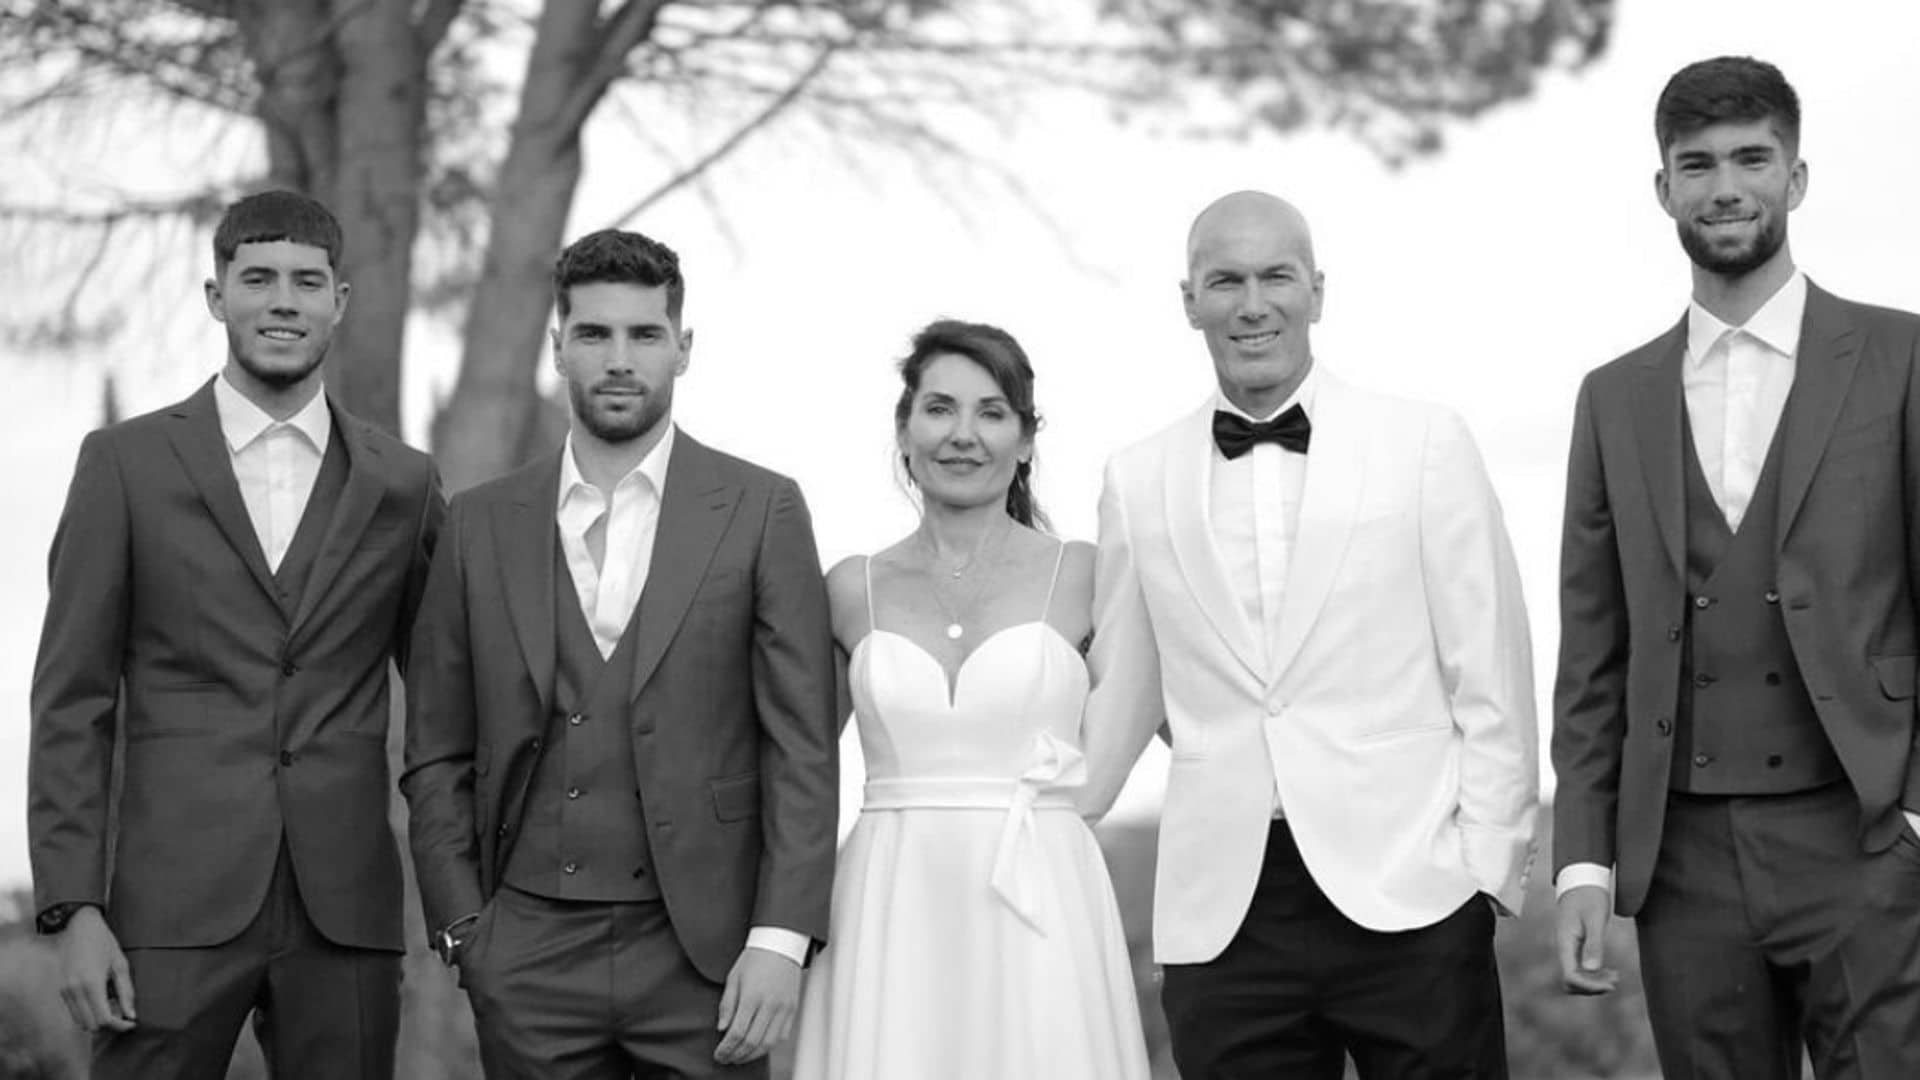 Zidane and Véronique celebrated their 30th anniversary by renewing their vows